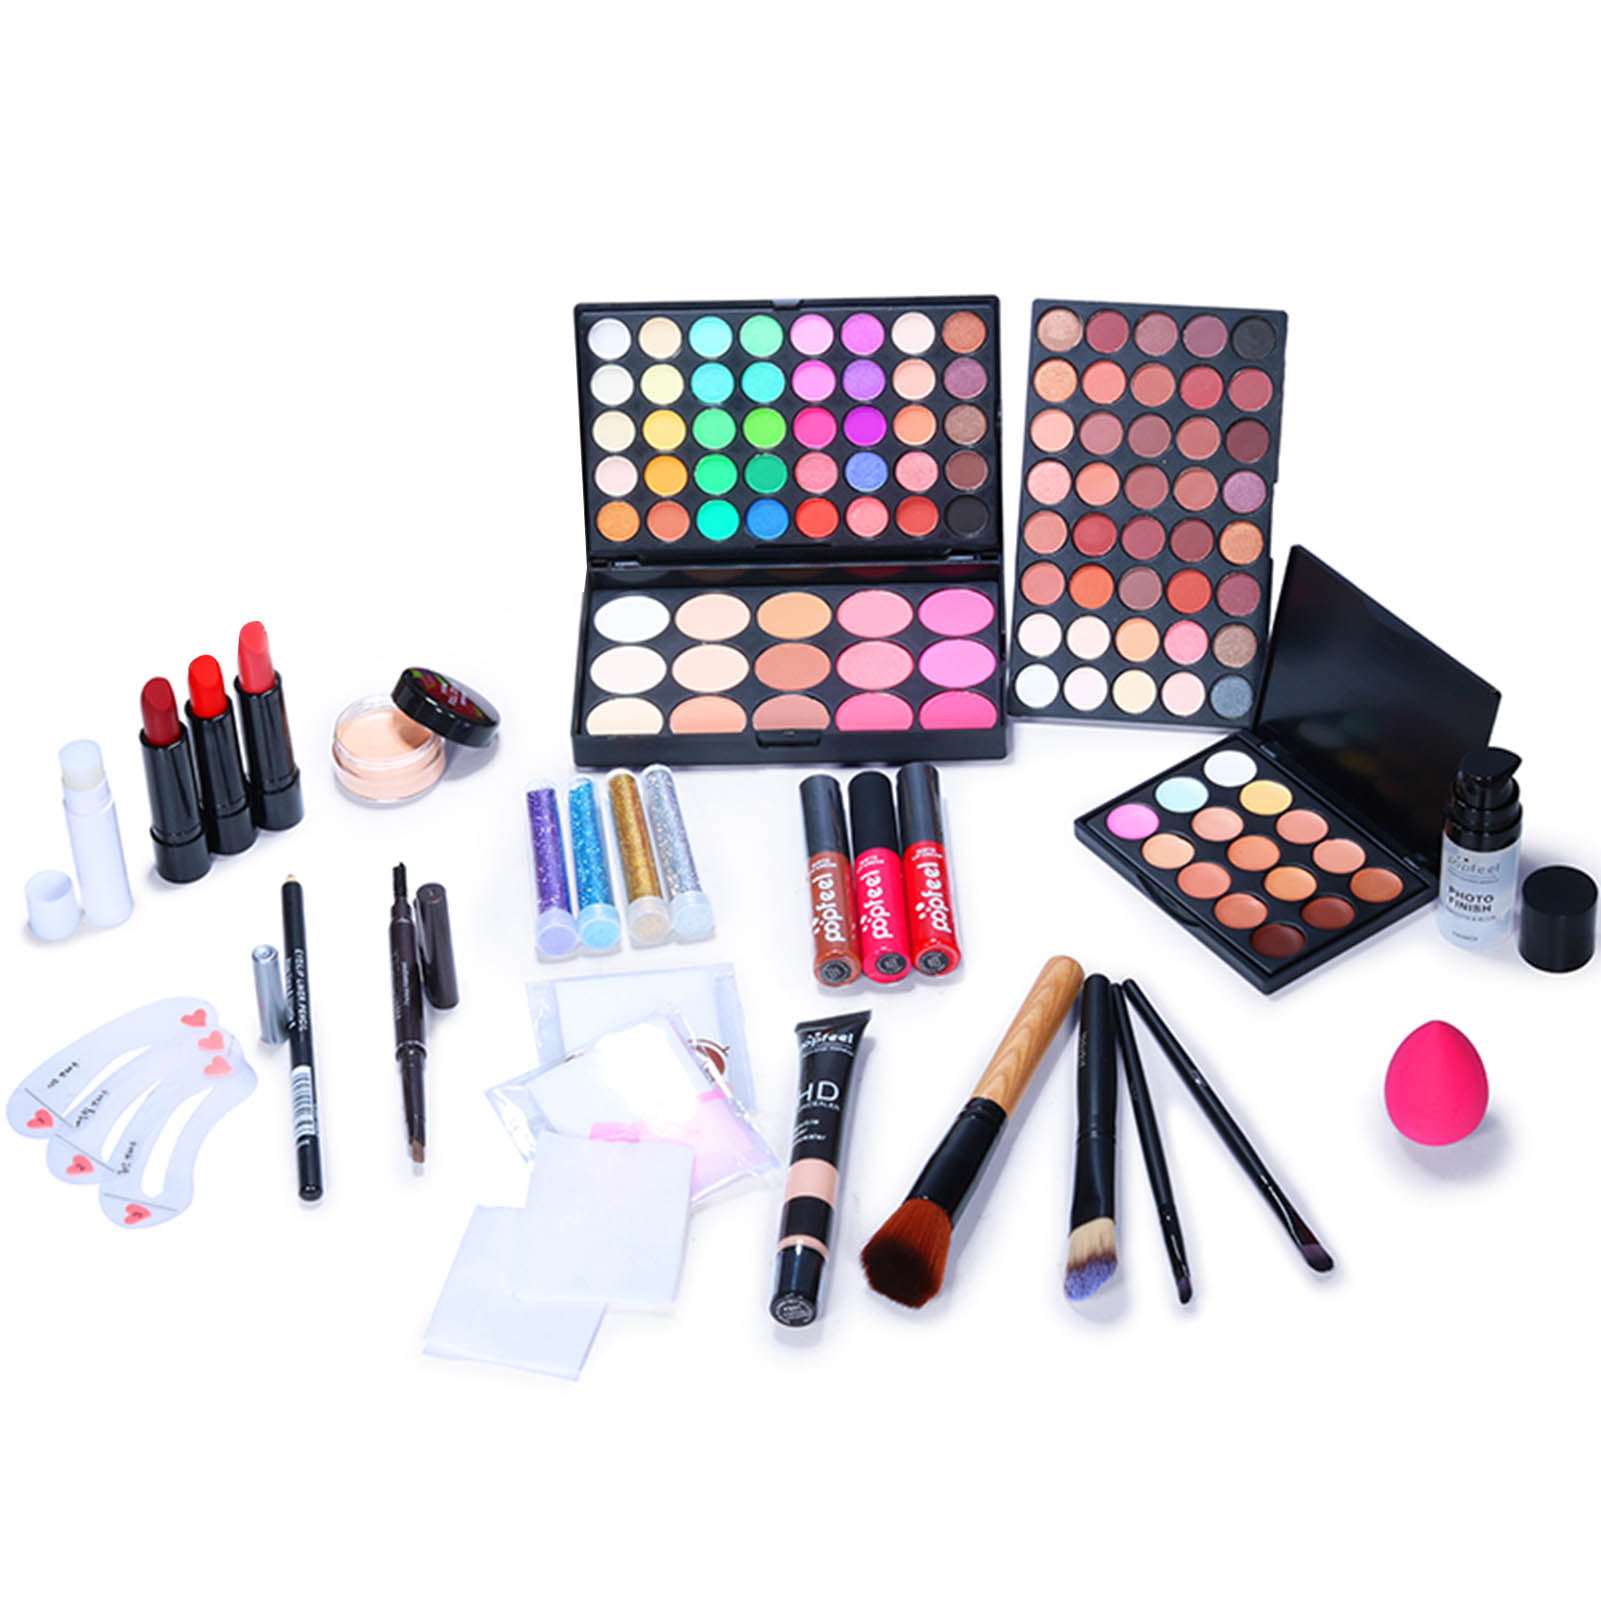 Decor Store Makeup Kit Multi-purpose Training All In One for Home - Walmart.com